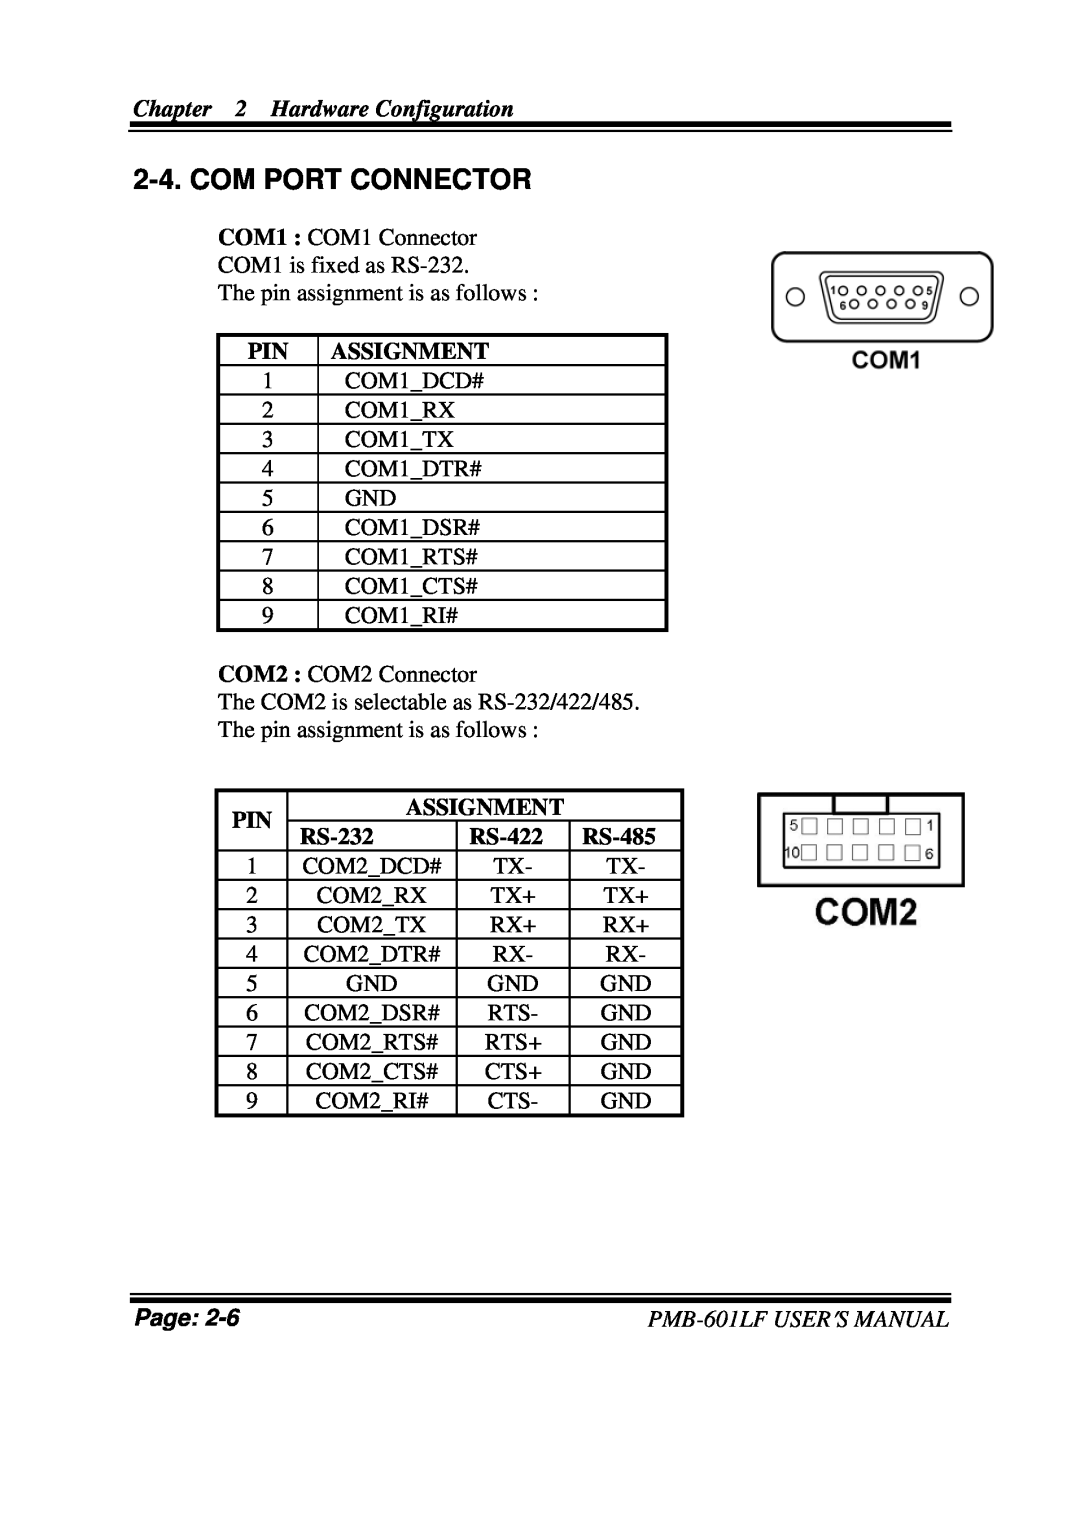 Intel PMB-601LF user manual Com Port Connector, Assignment, RS-232, RS-422, RS-485, Hardware Configuration, Page 